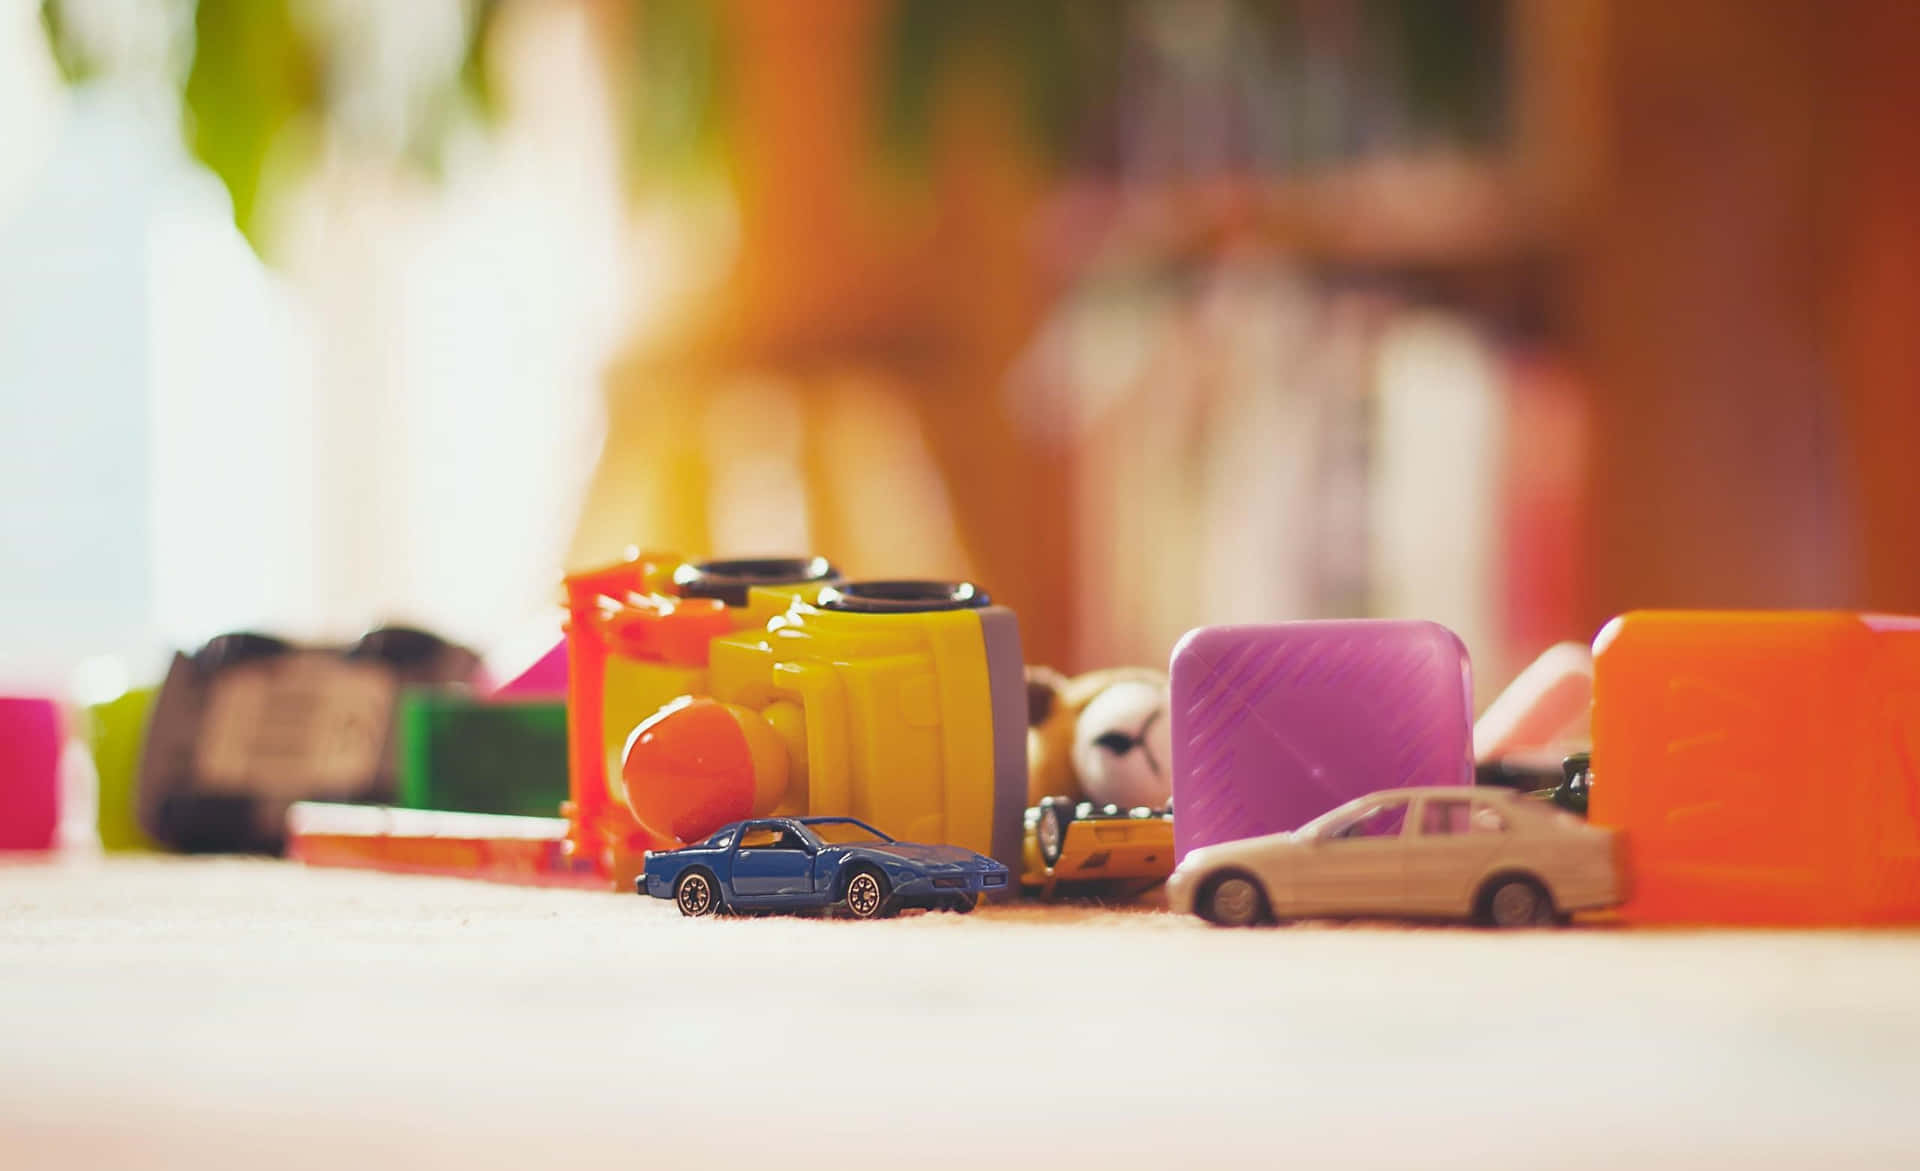 Colorful Toy Assortment Scene Wallpaper